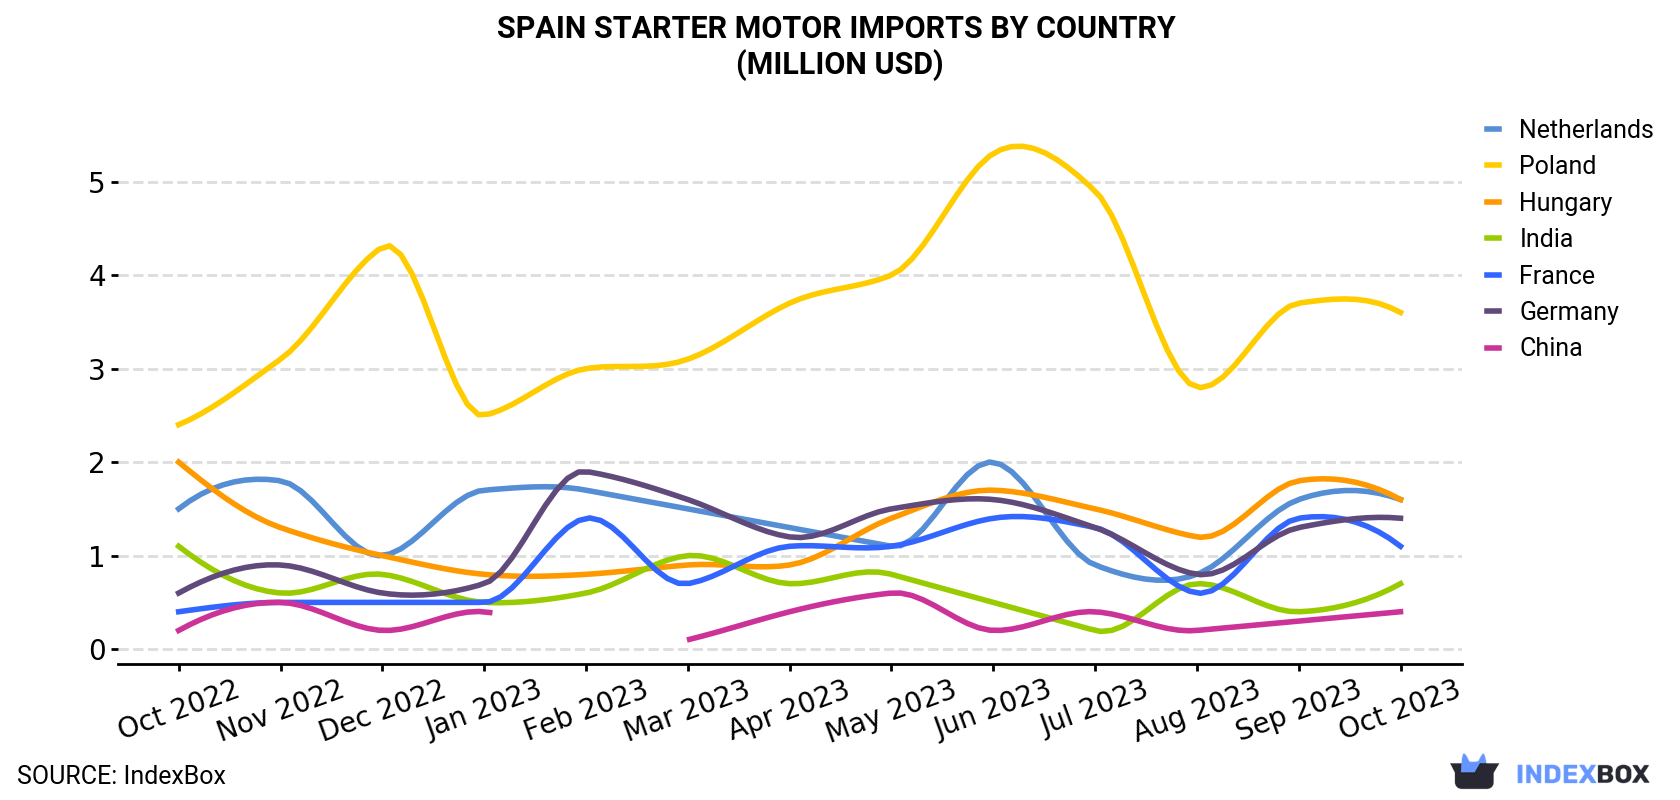 Spain Starter Motor Imports By Country (Million USD)